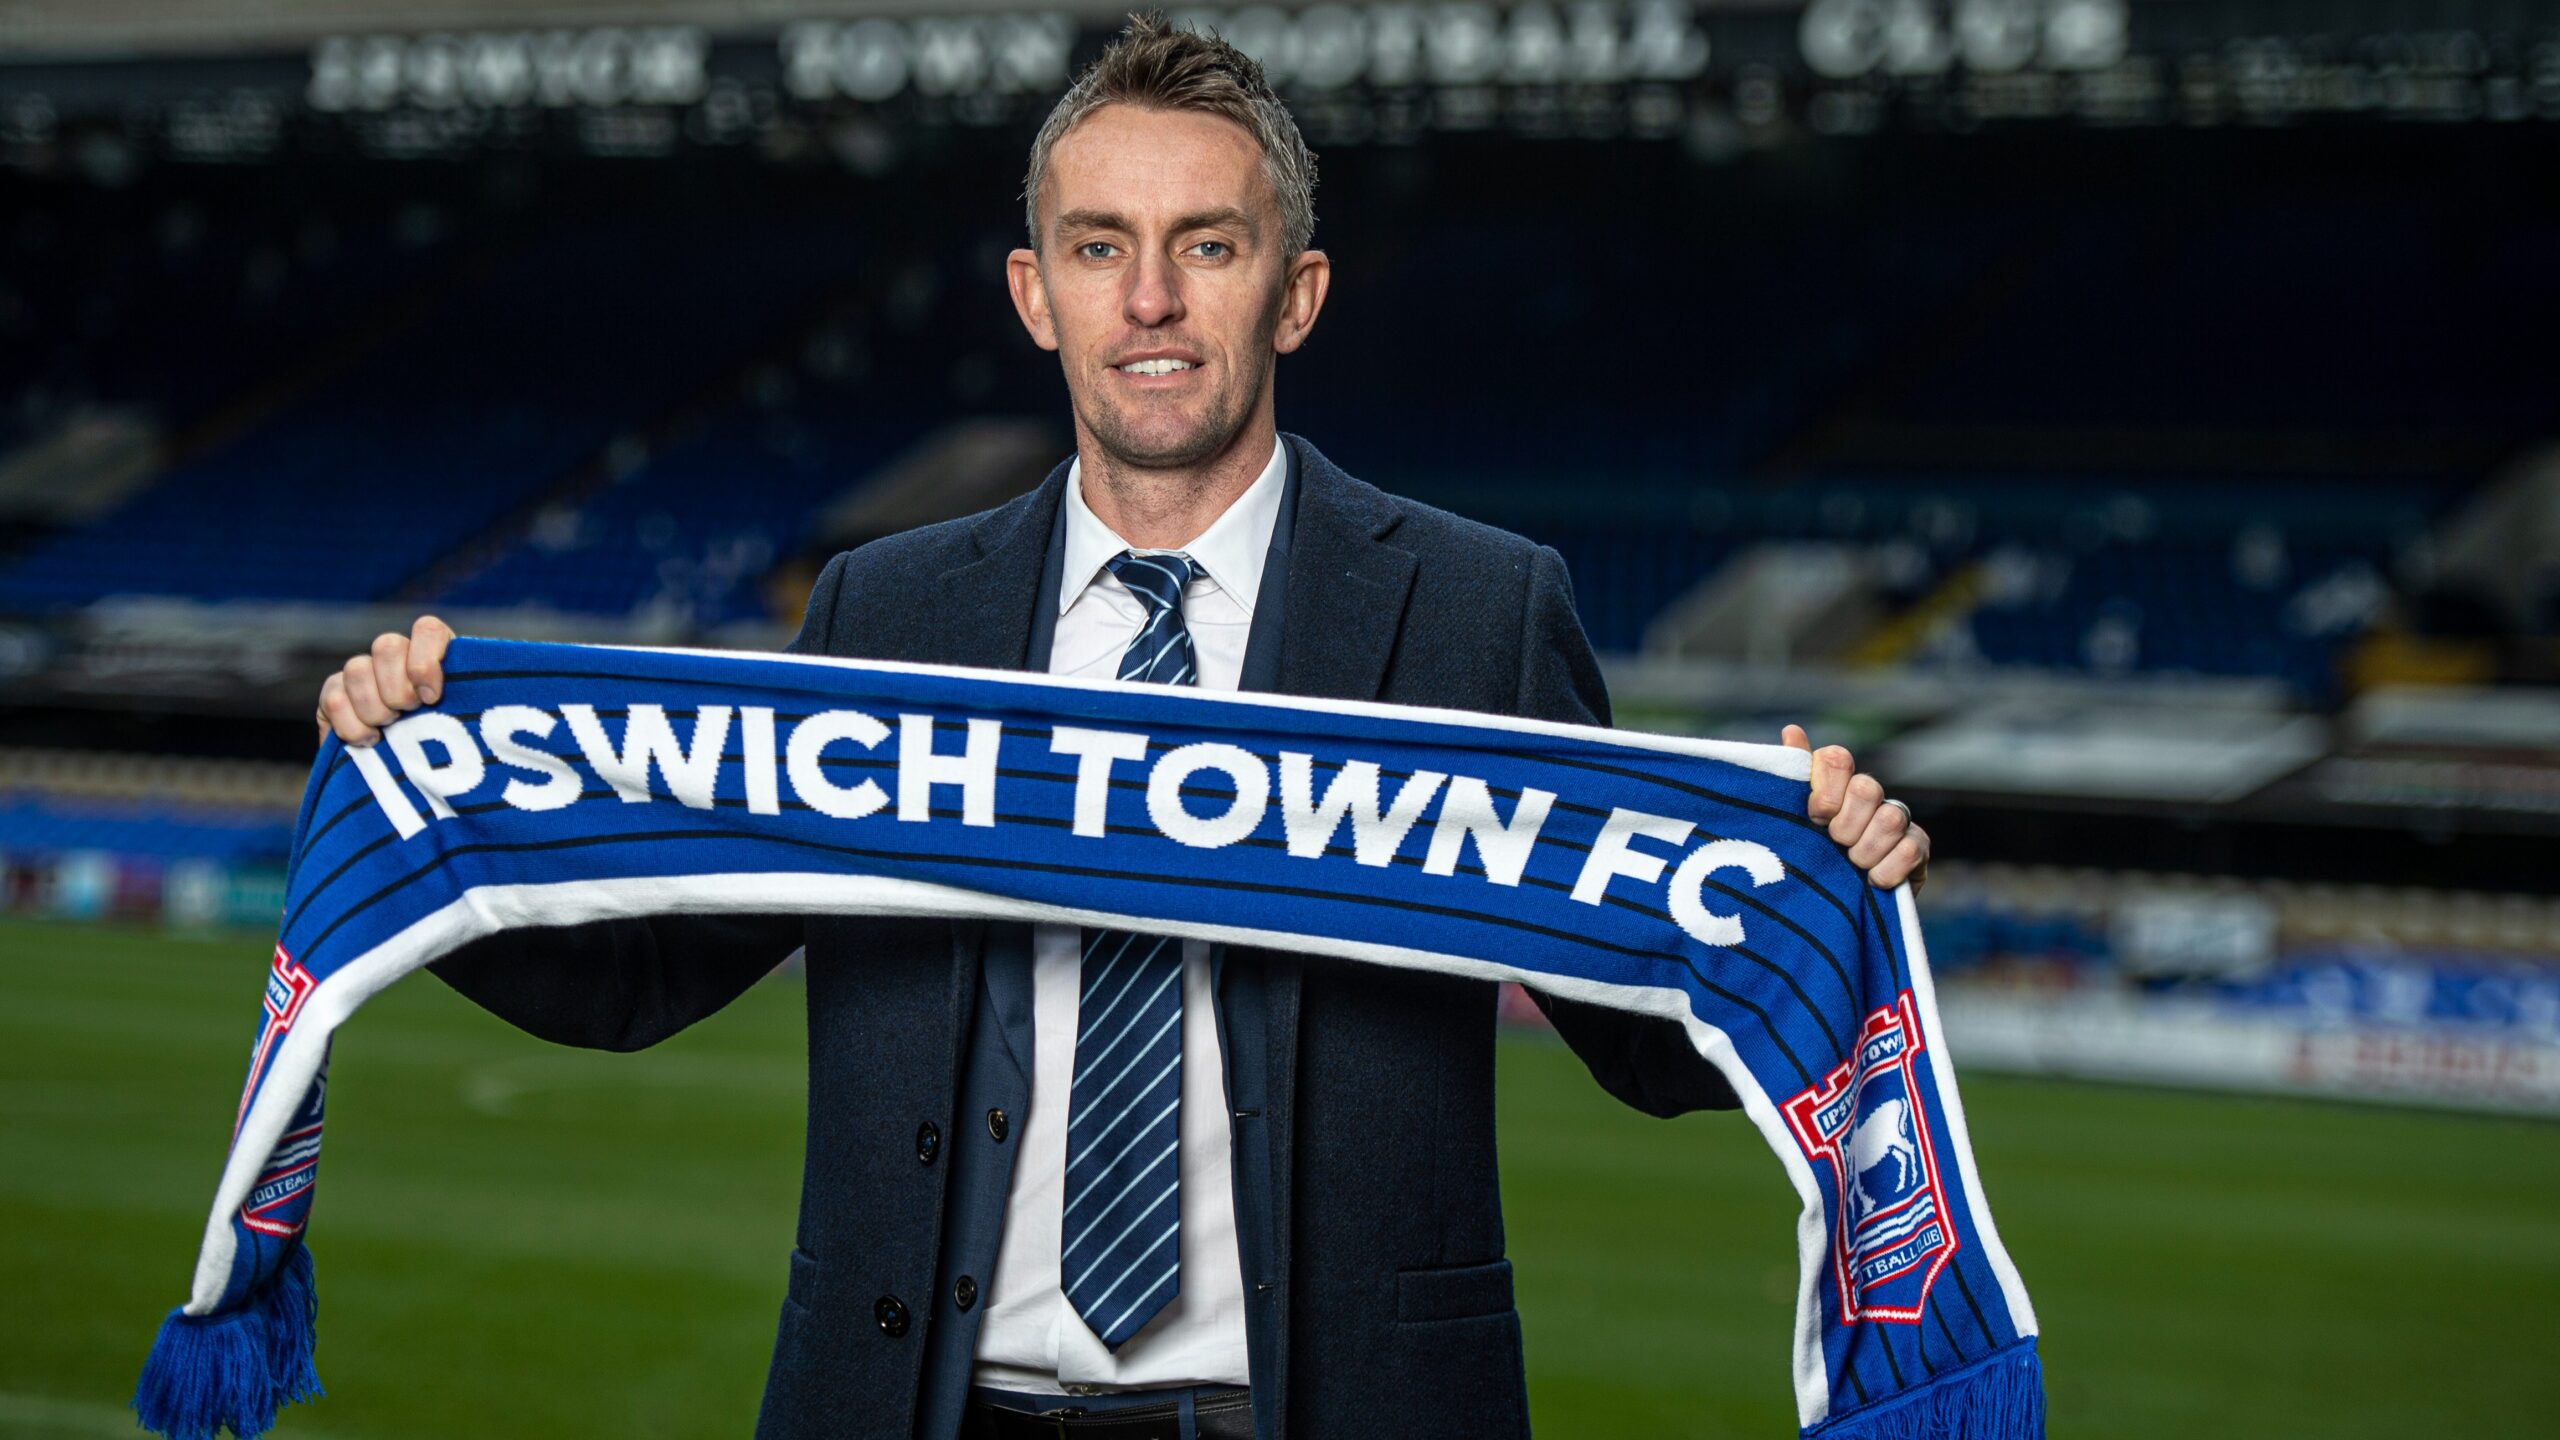 BBC REPORT: Ipswich Town might lose their manager as premier leaugue side shows strong in his ability…